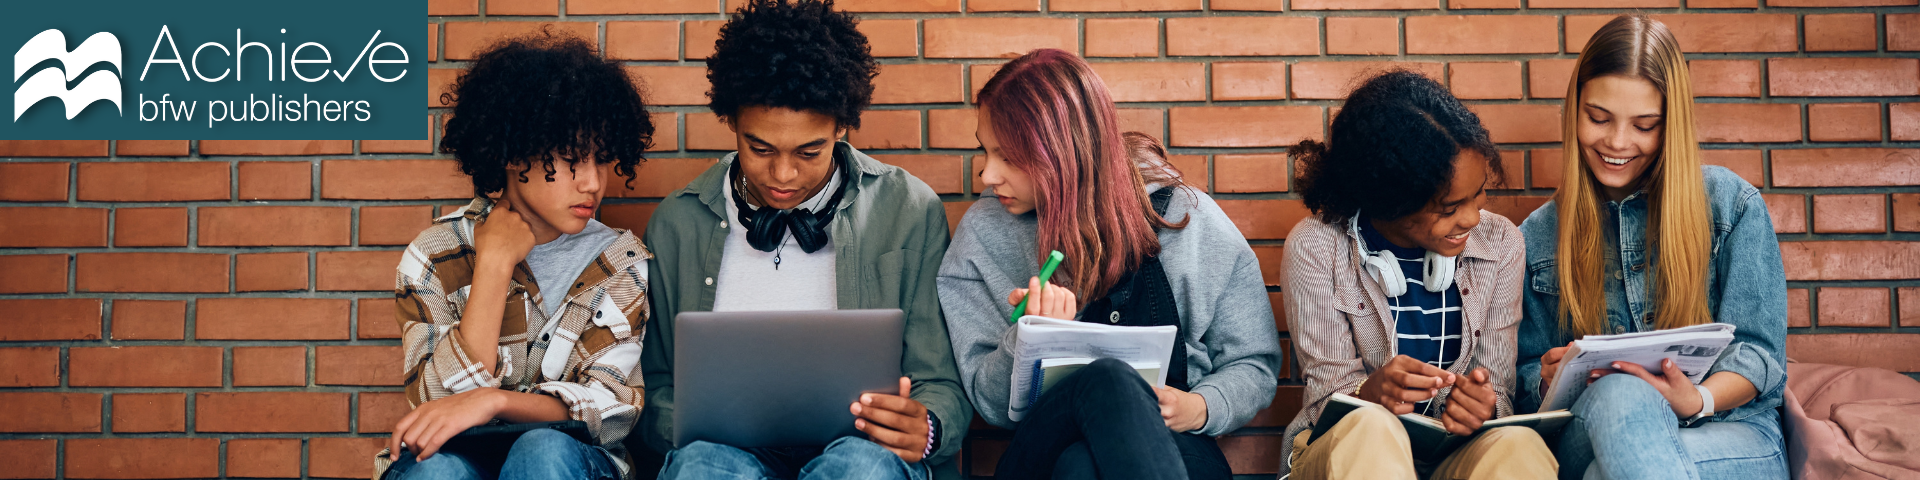 photograph of five students doing homework together against a brick wall.